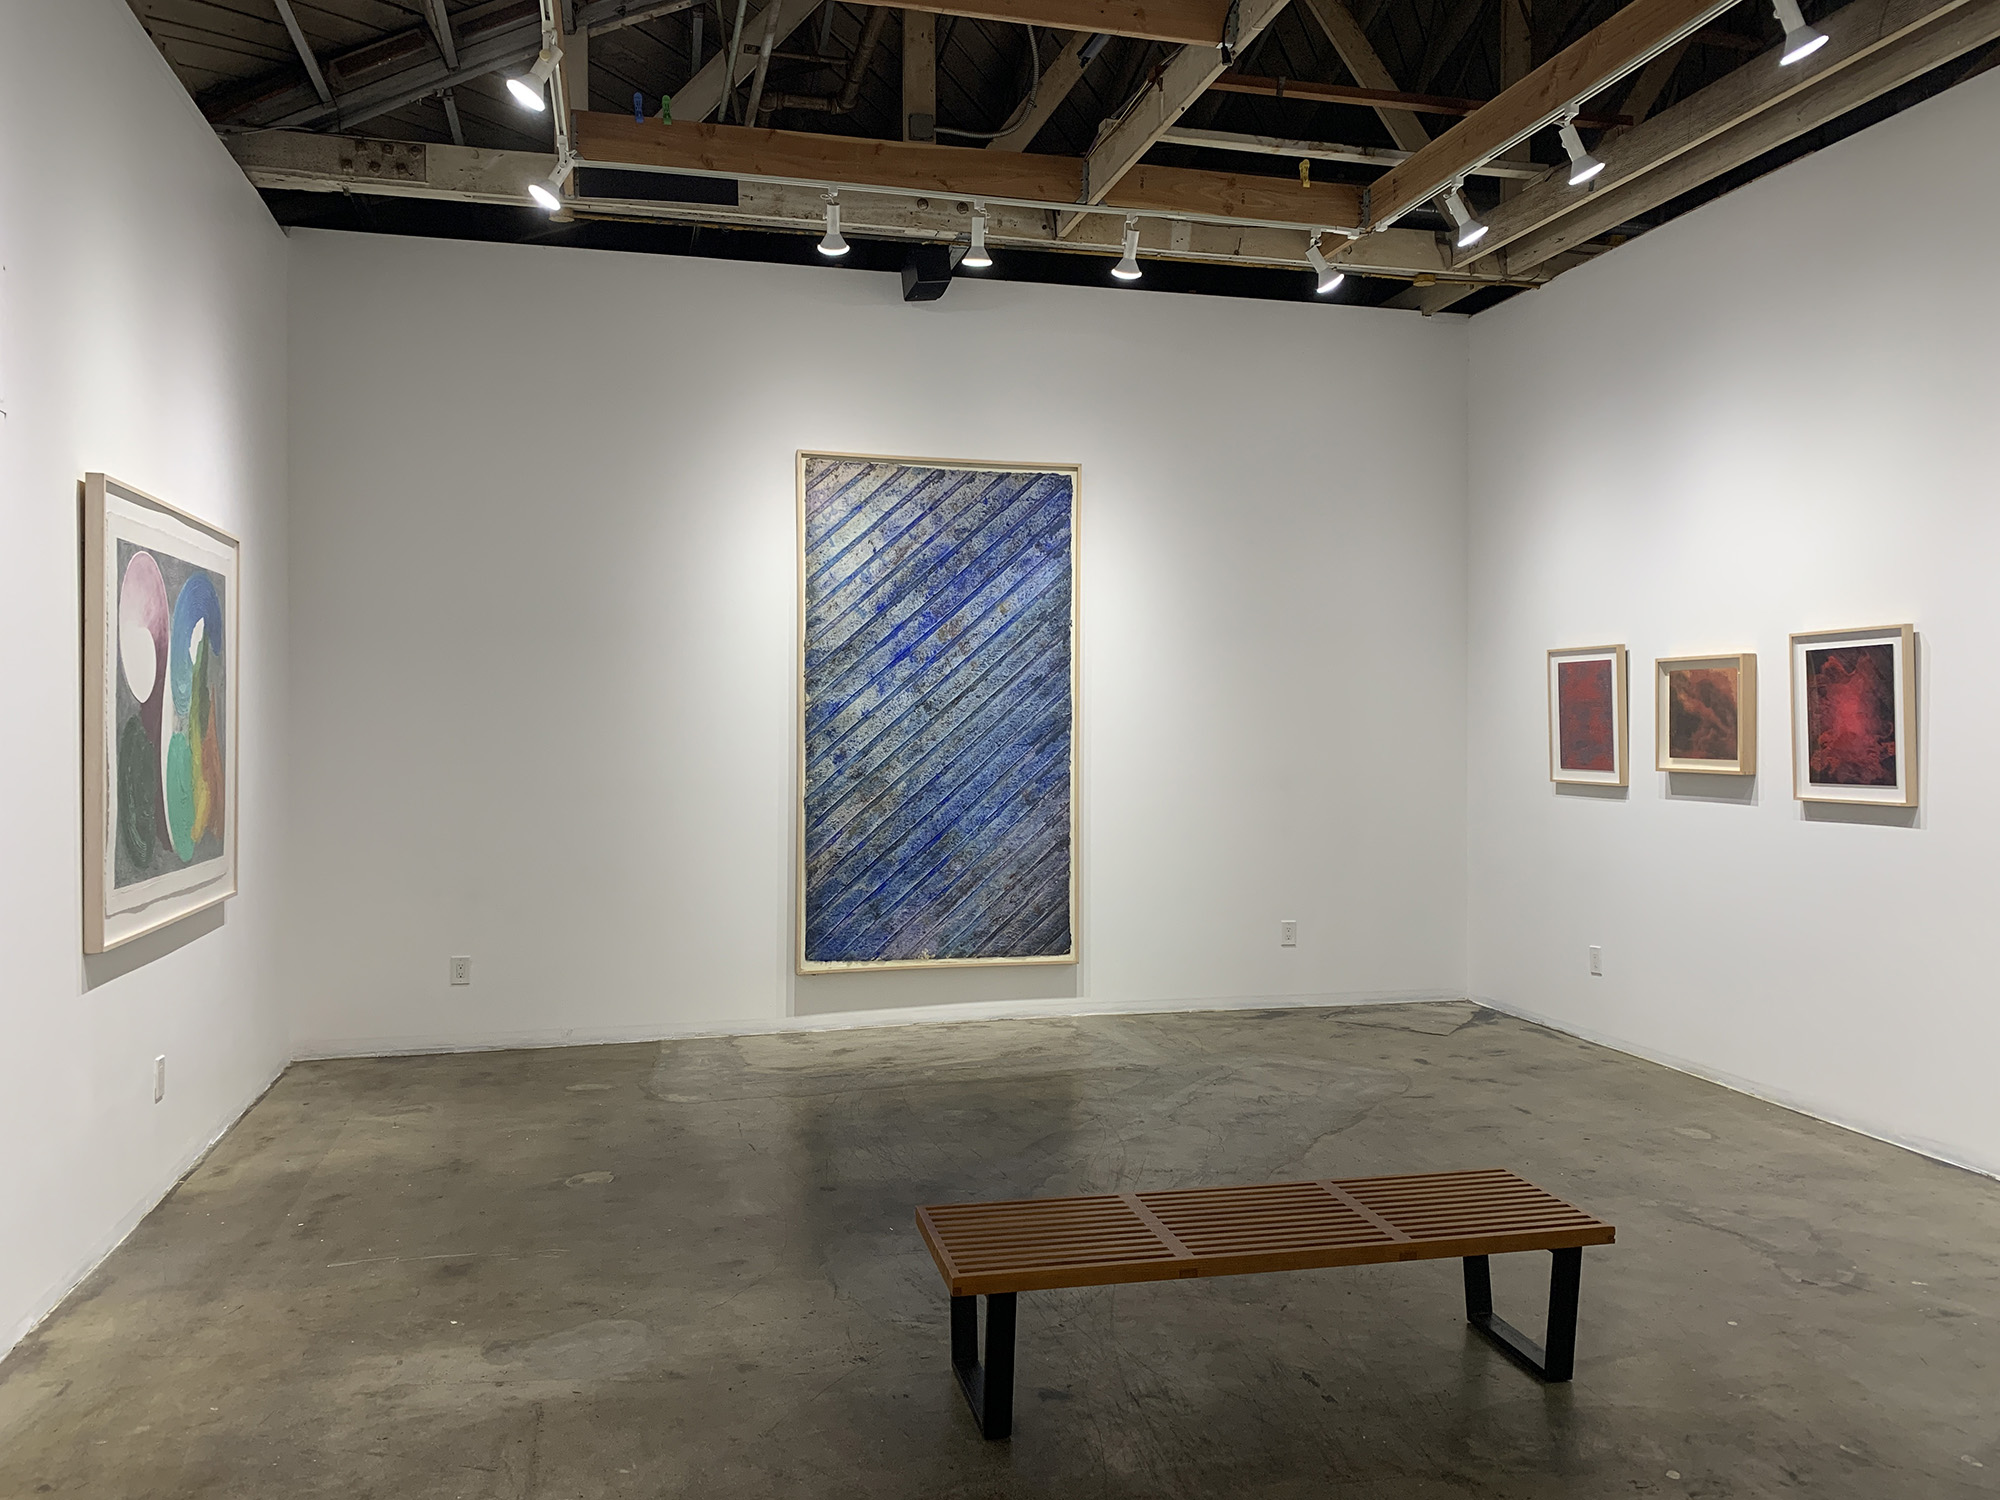 Picture of the exhibition printed landscape featuring the works of William Tillyer, Kenneth Noland, and Joe Goode, which is on view at Mixografia from July 29 - September 2, 2023.